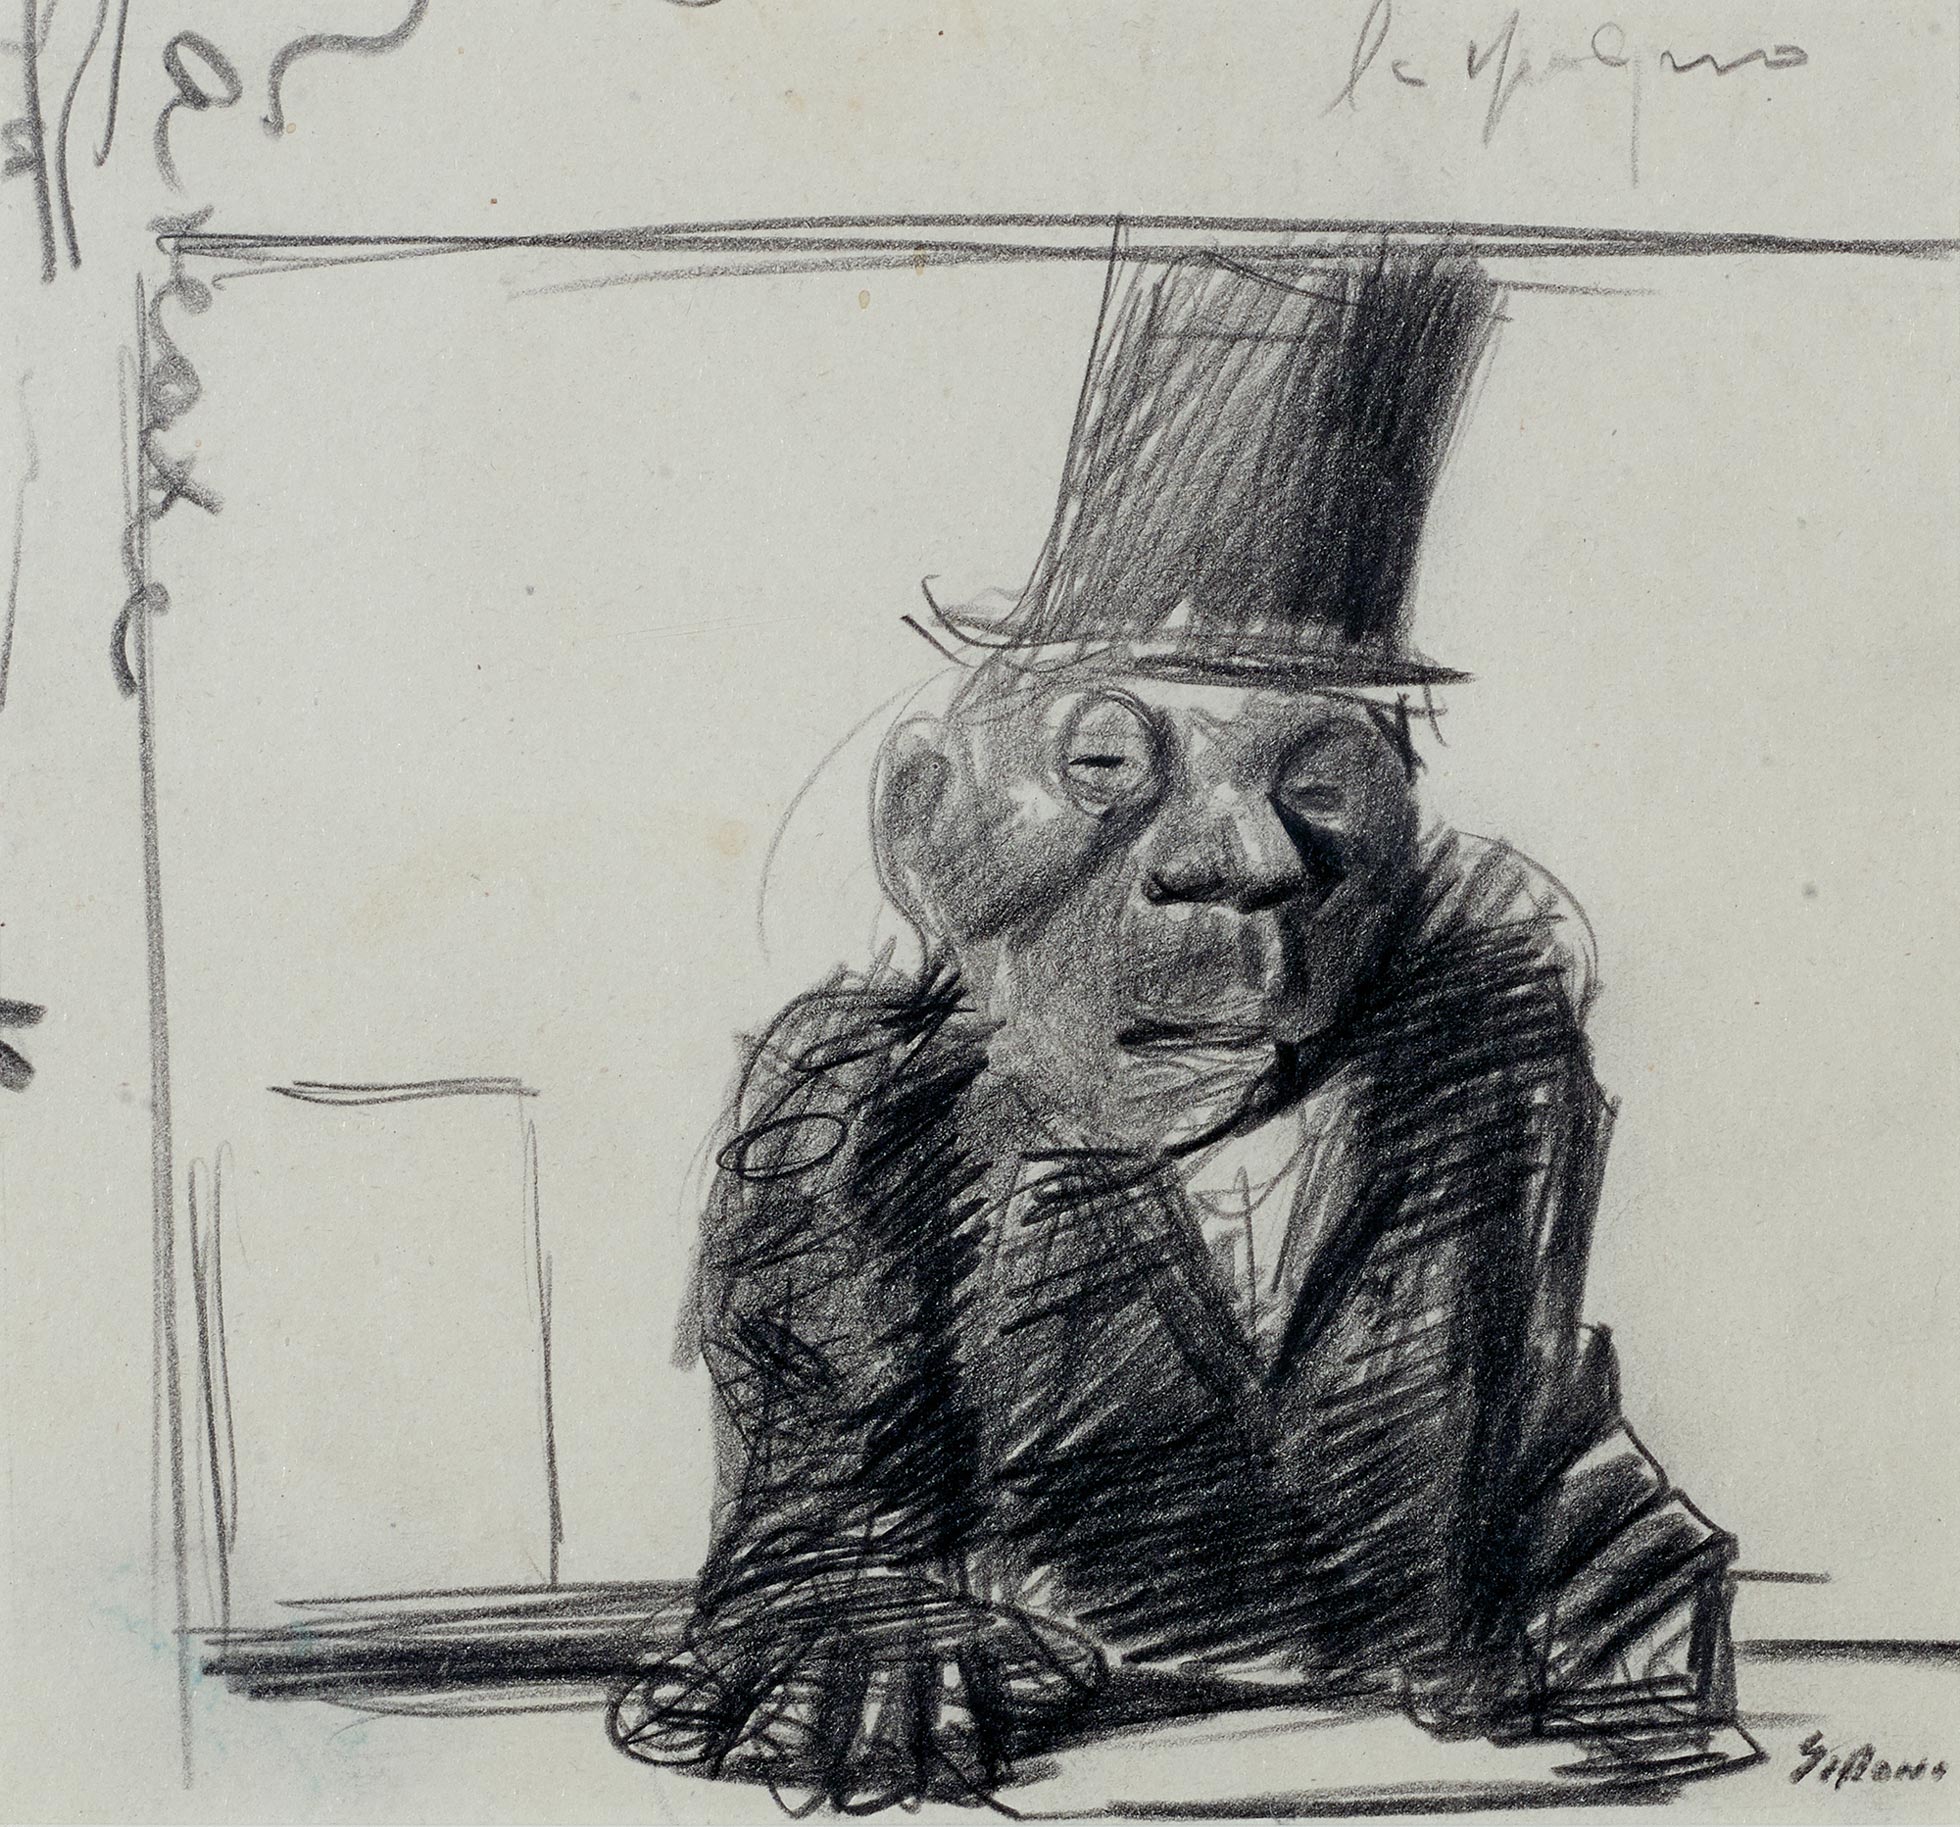 Mario Sironi, Man with a Top Hat (drawing for a political cartoon), n.d.